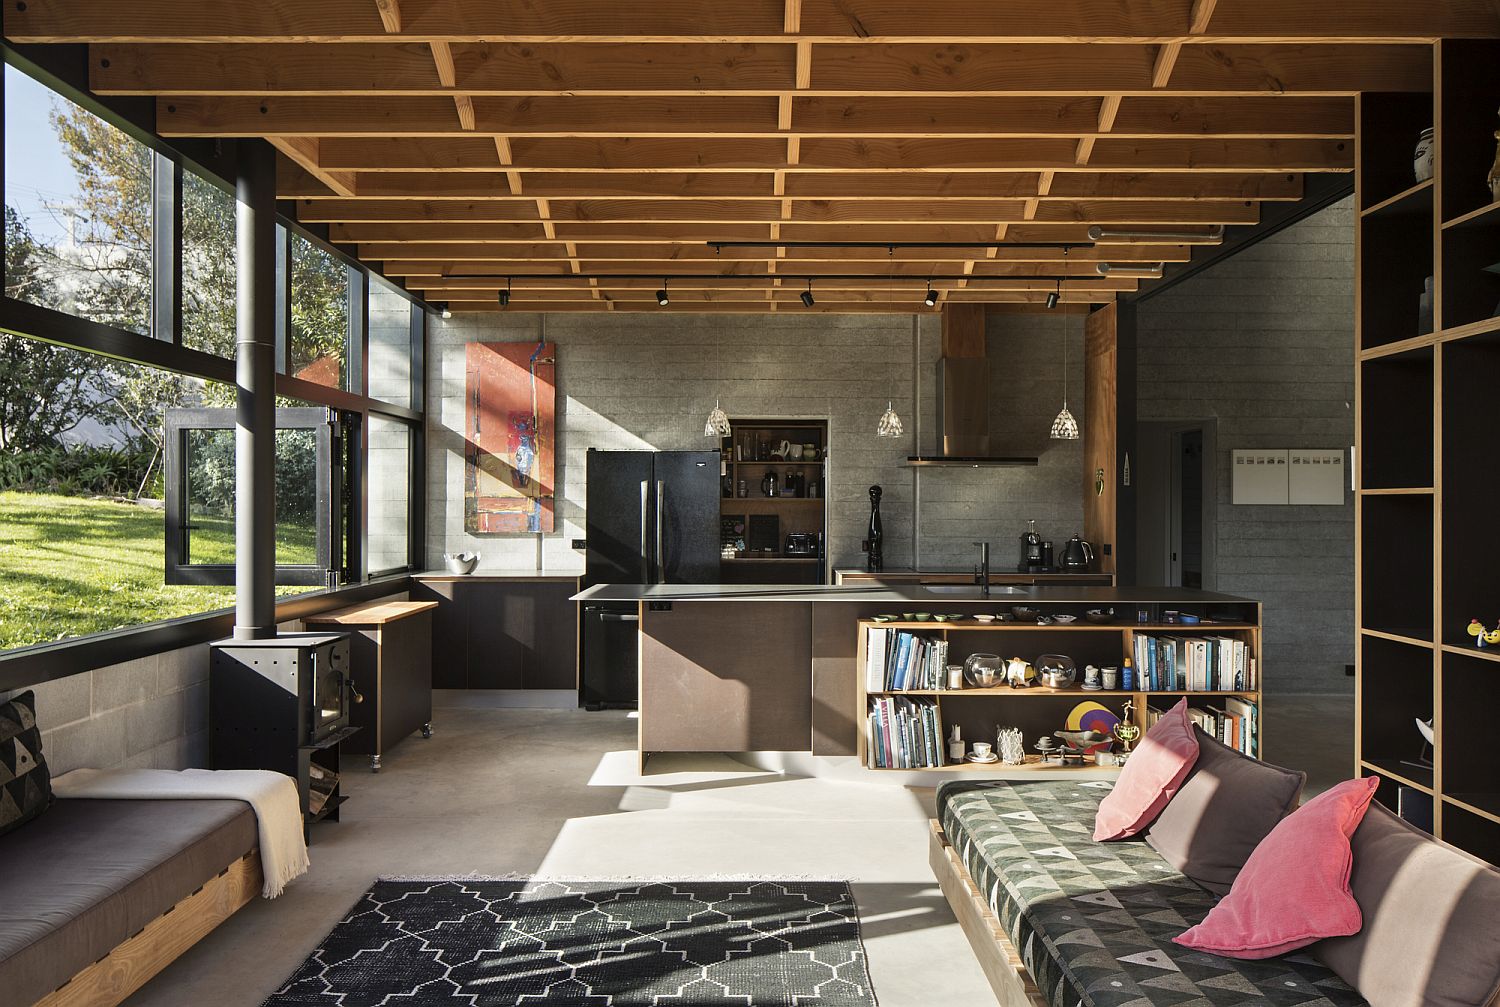 Kitchen-and-sitting-area-with-mezzanine-level-above